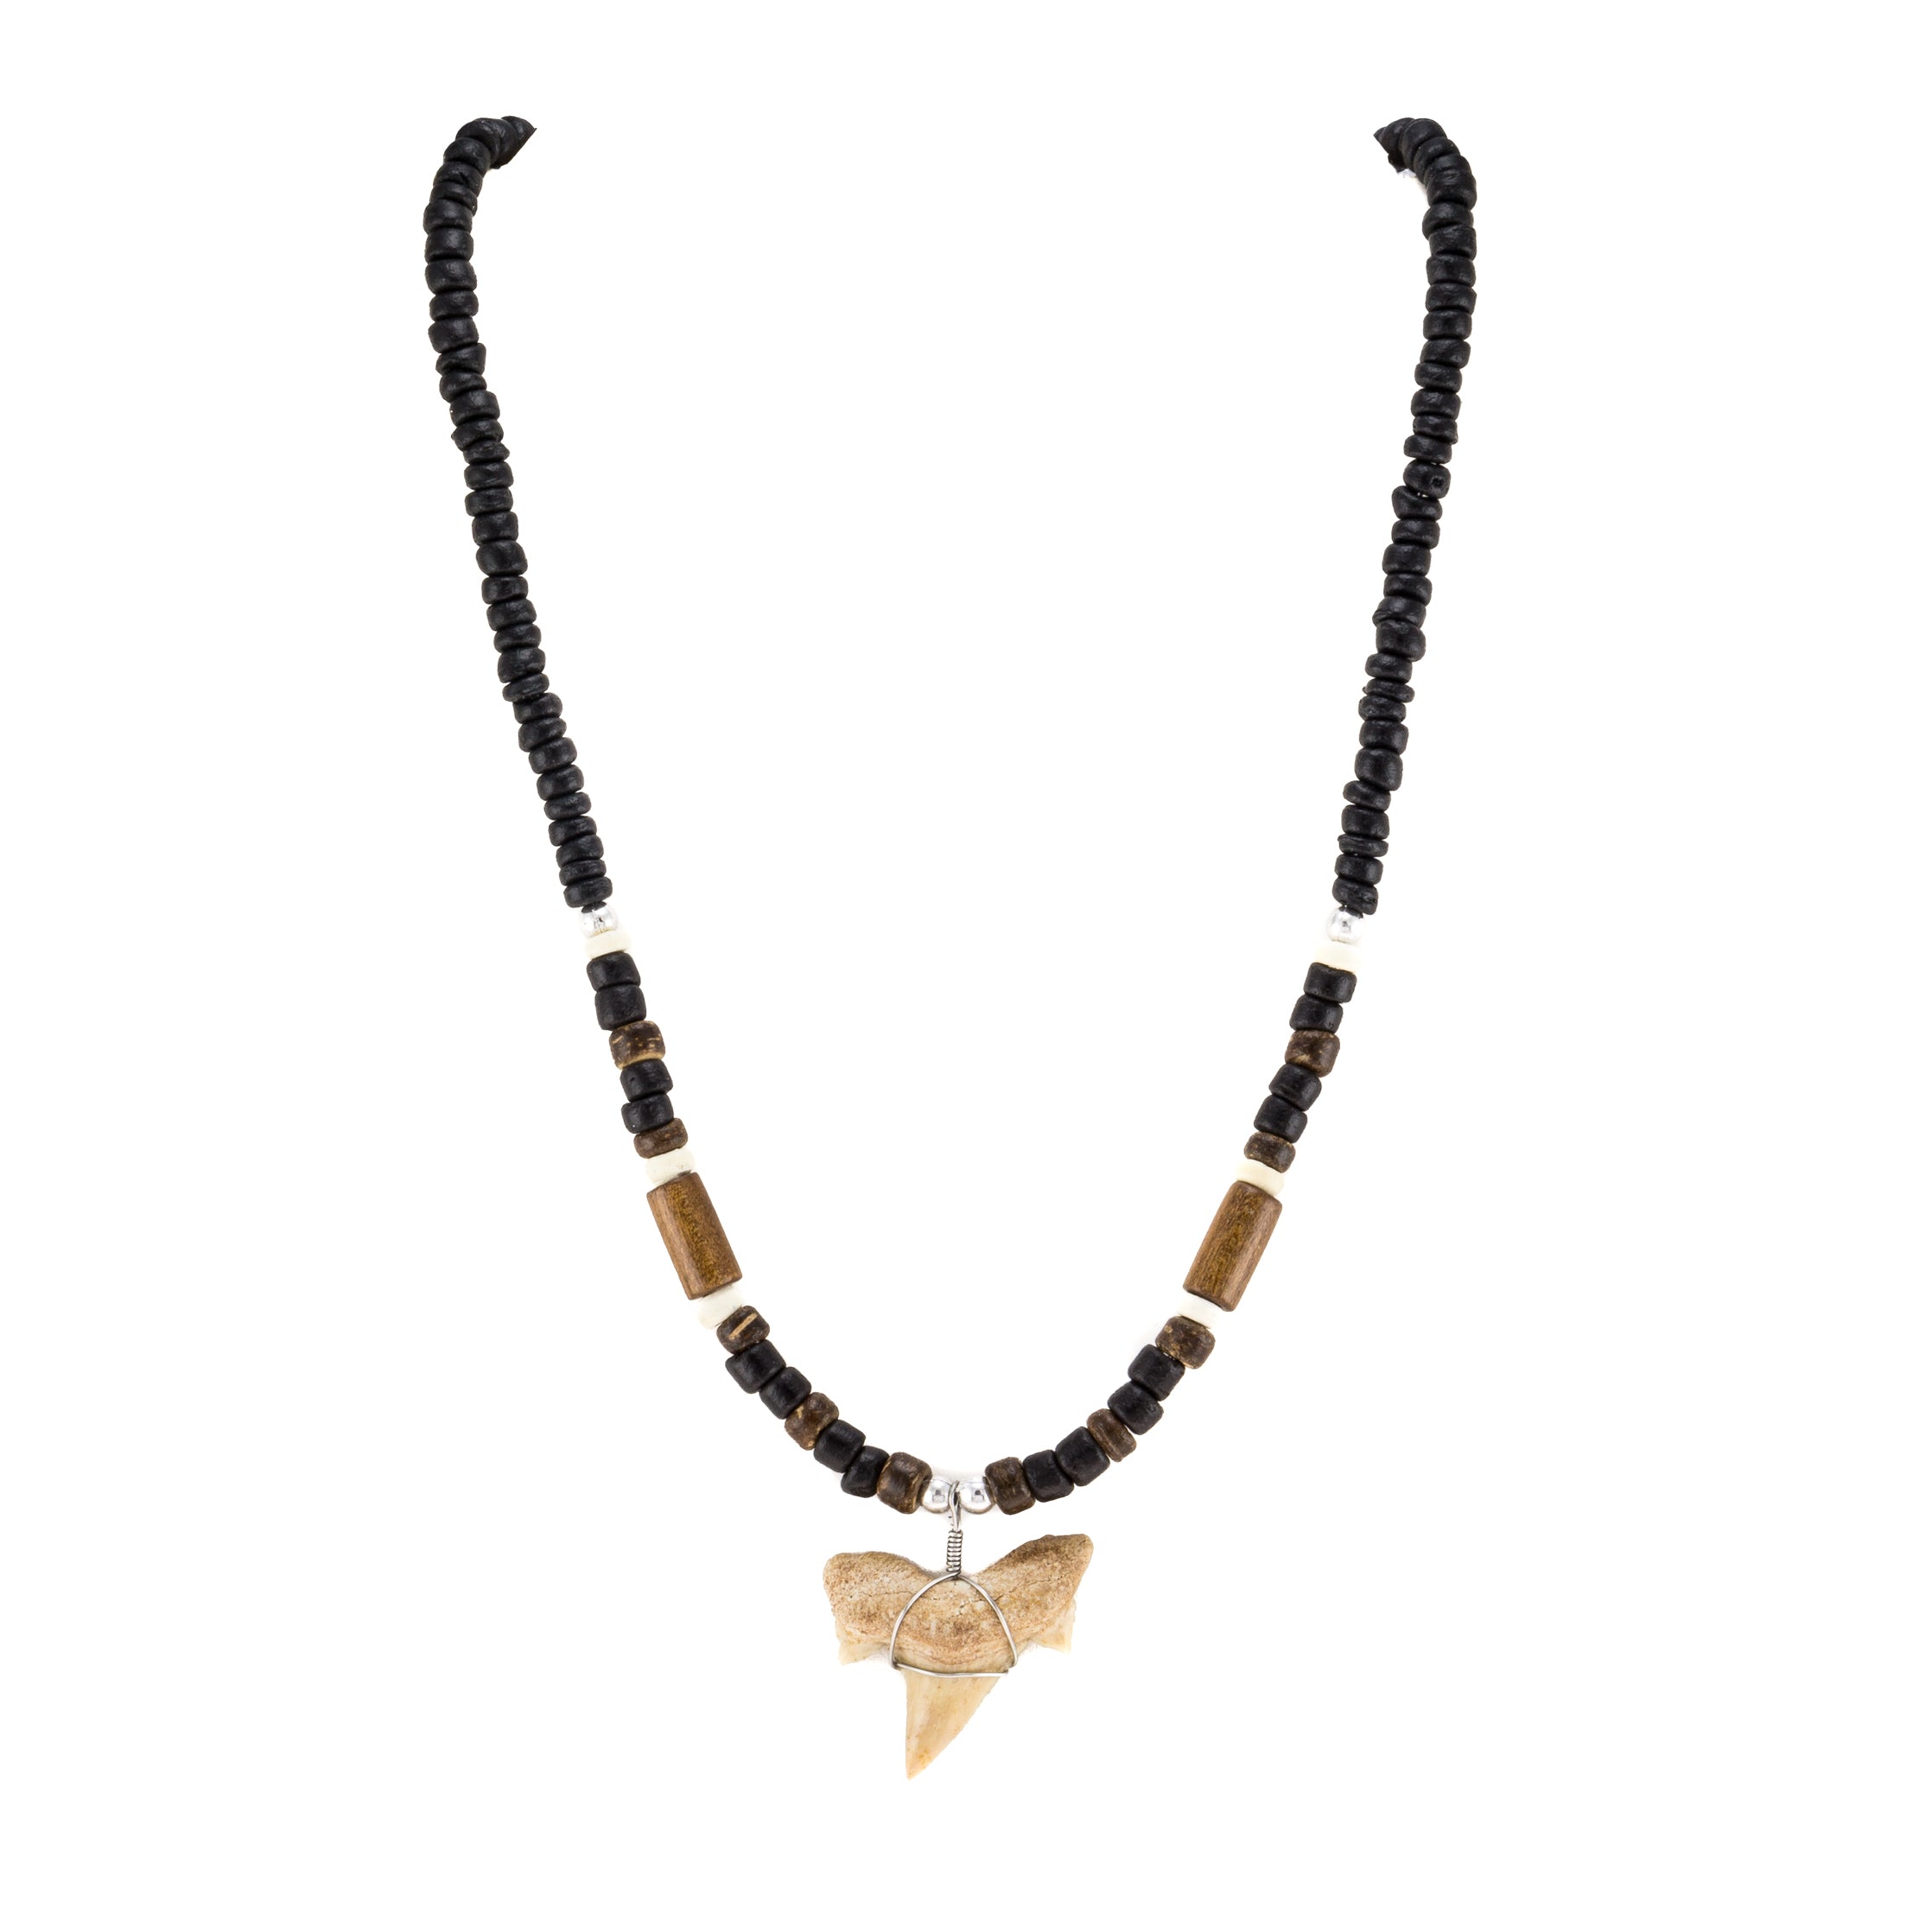 1"+ Shark Tooth Pendant on Black Coconut Beads & Wood Tubes Necklace